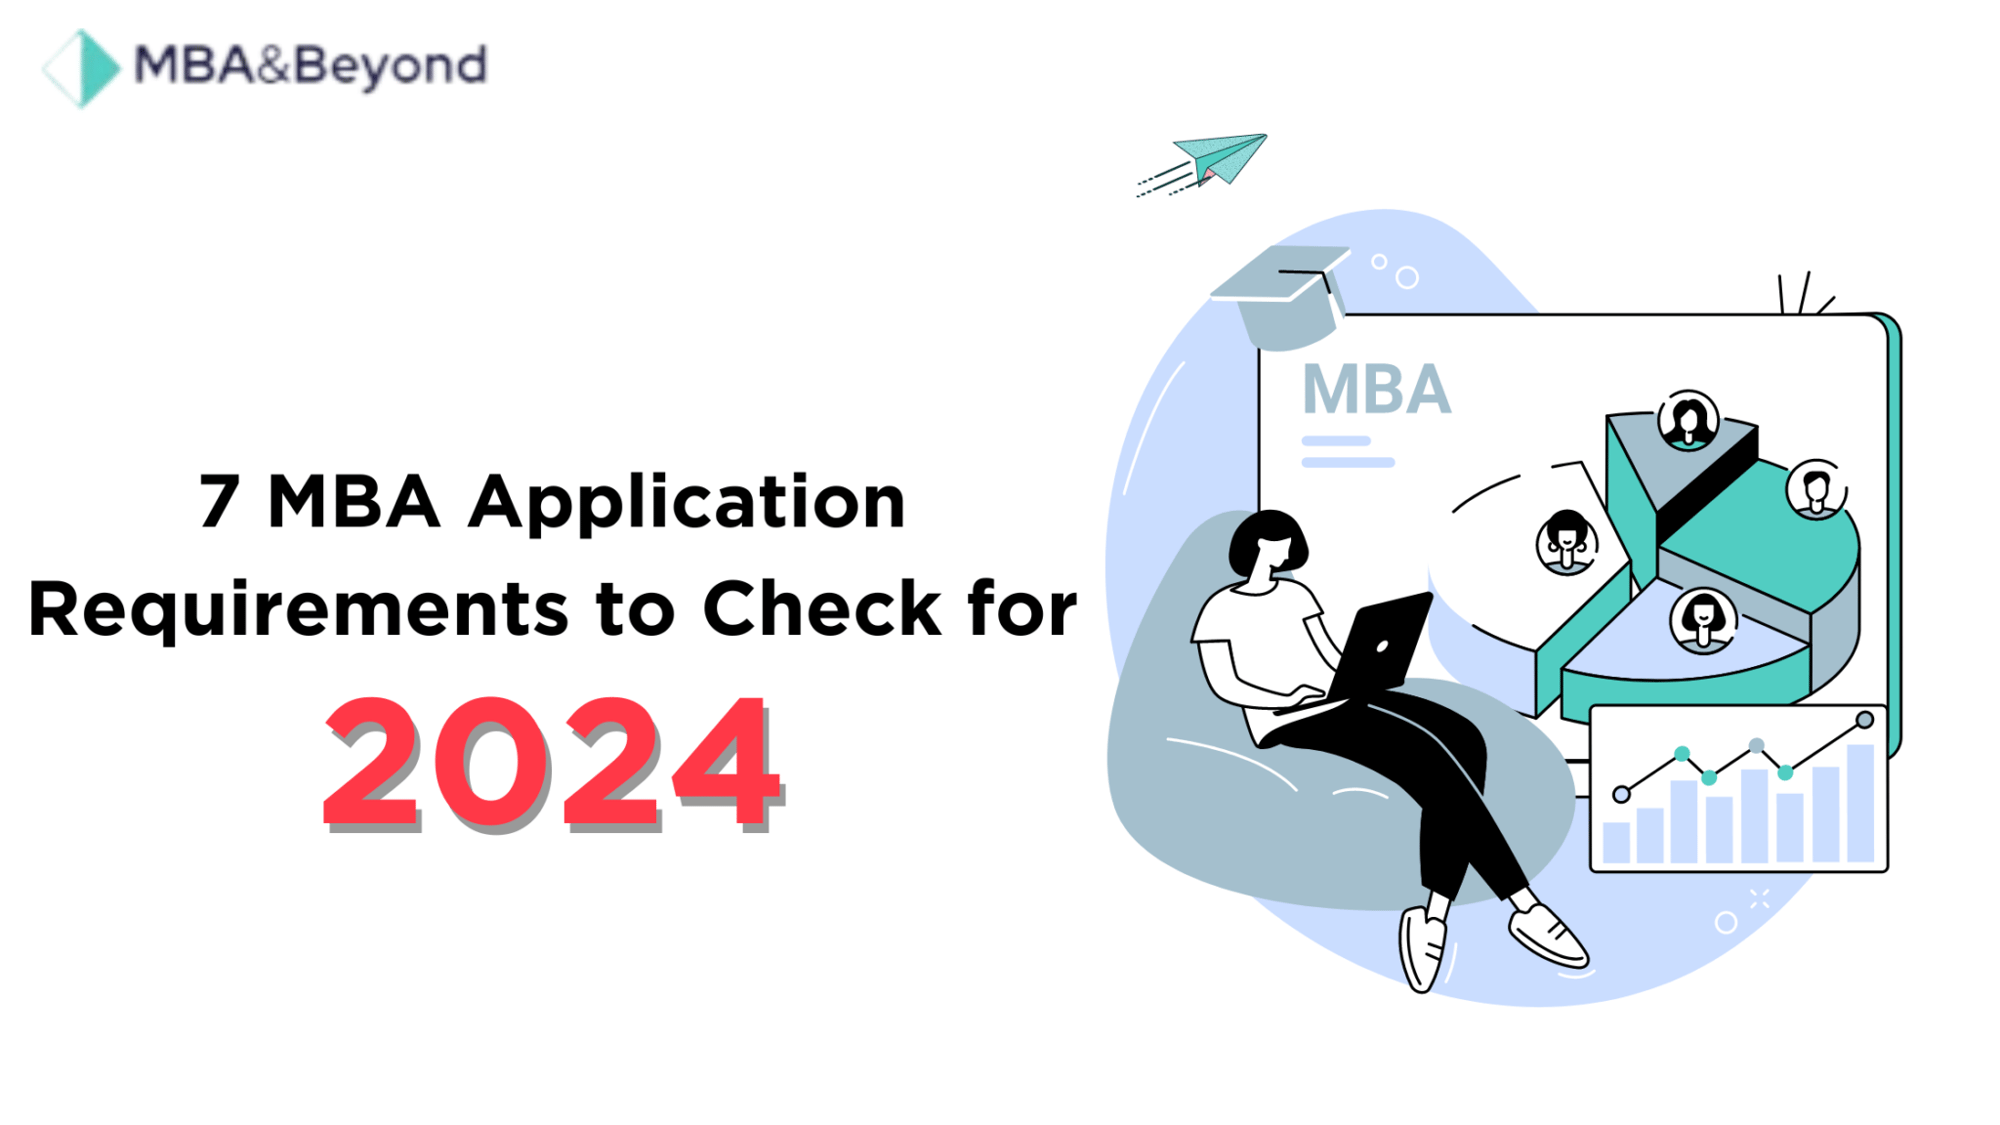 7-MBA-Application-Requirements-to-Check-for-2024-3-2048x1152